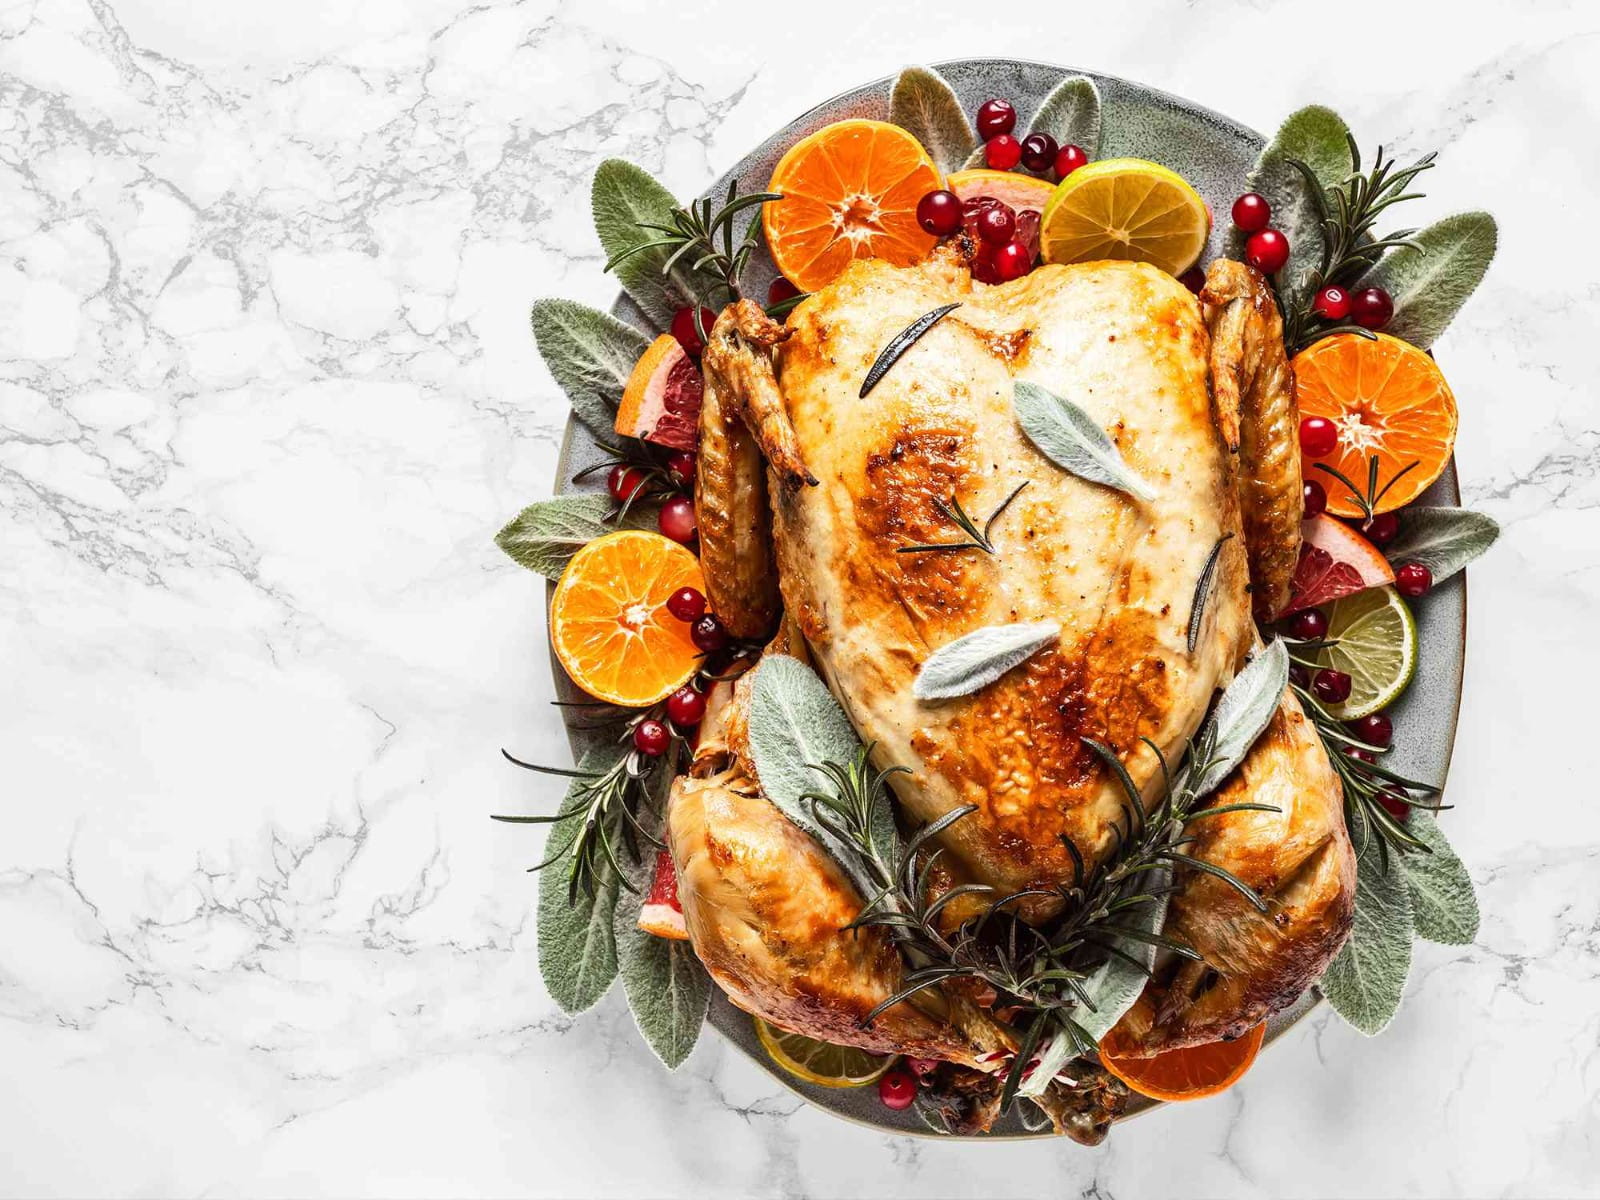 https://www.mccormick.com/-/media/project/oneweb/mccormick-us/mccormick/articles/this-is-the-easiest-way-to-cook-a-thanksgiving-turkey-url.jpeg?rev=8e46ef70359e4716aeede33adba8c43c&vd=20230421T195808Z&hash=DBEB480055F0A3EB7BD5470C137B0CB8